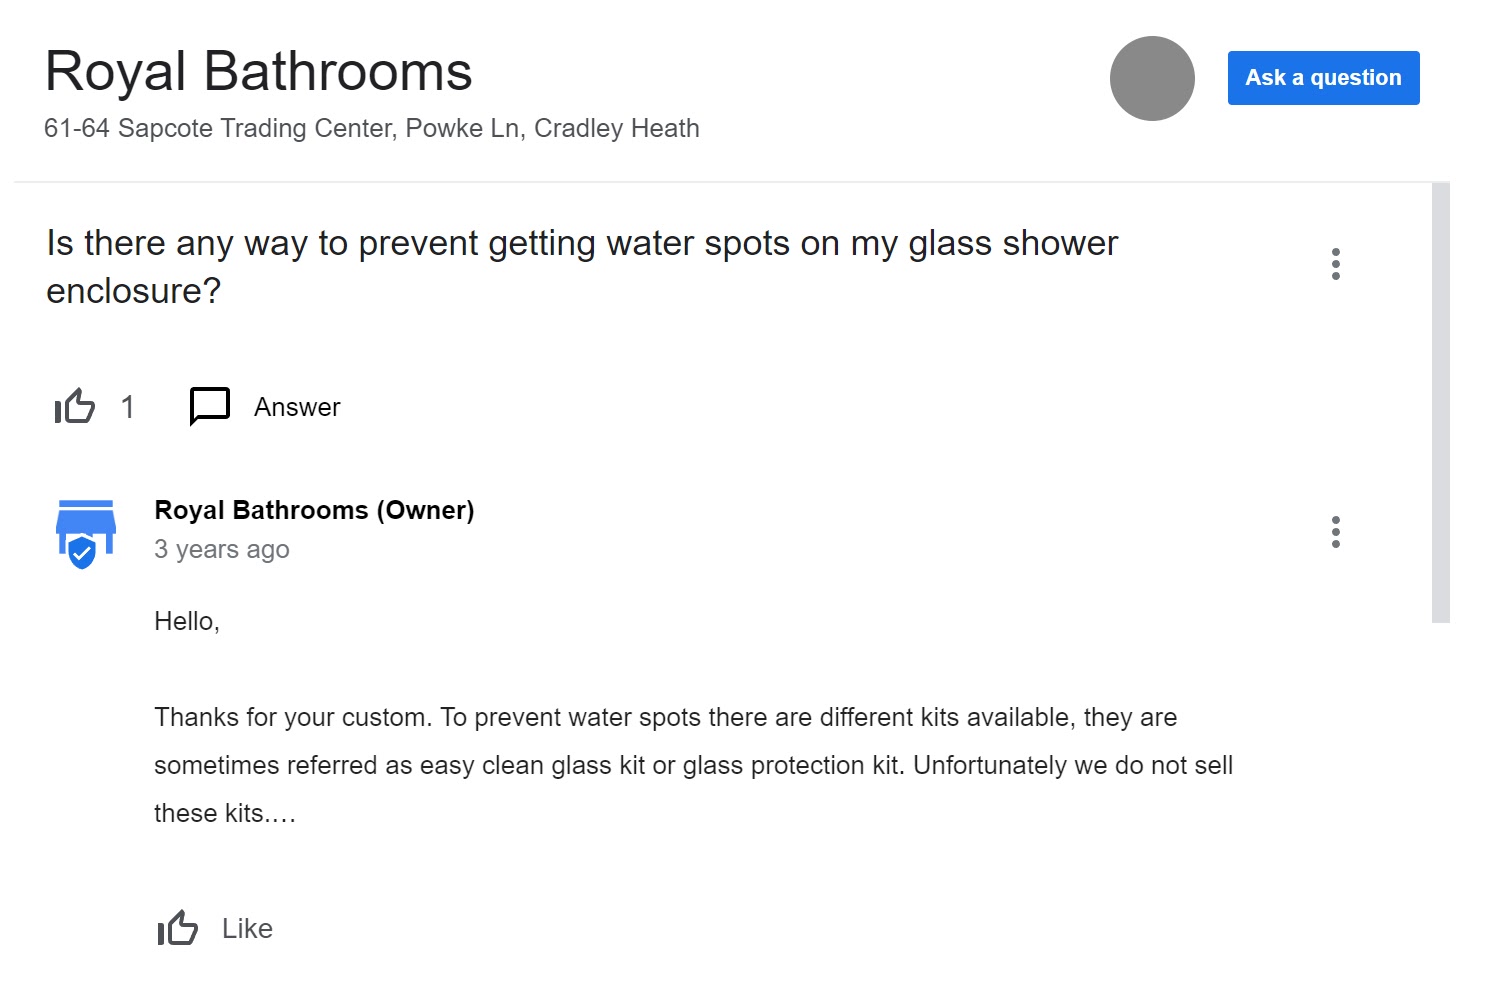 Royal Bathrooms's "Is there any way to prevent getting water spots on my glass shower enclosure?" question under Q&A section